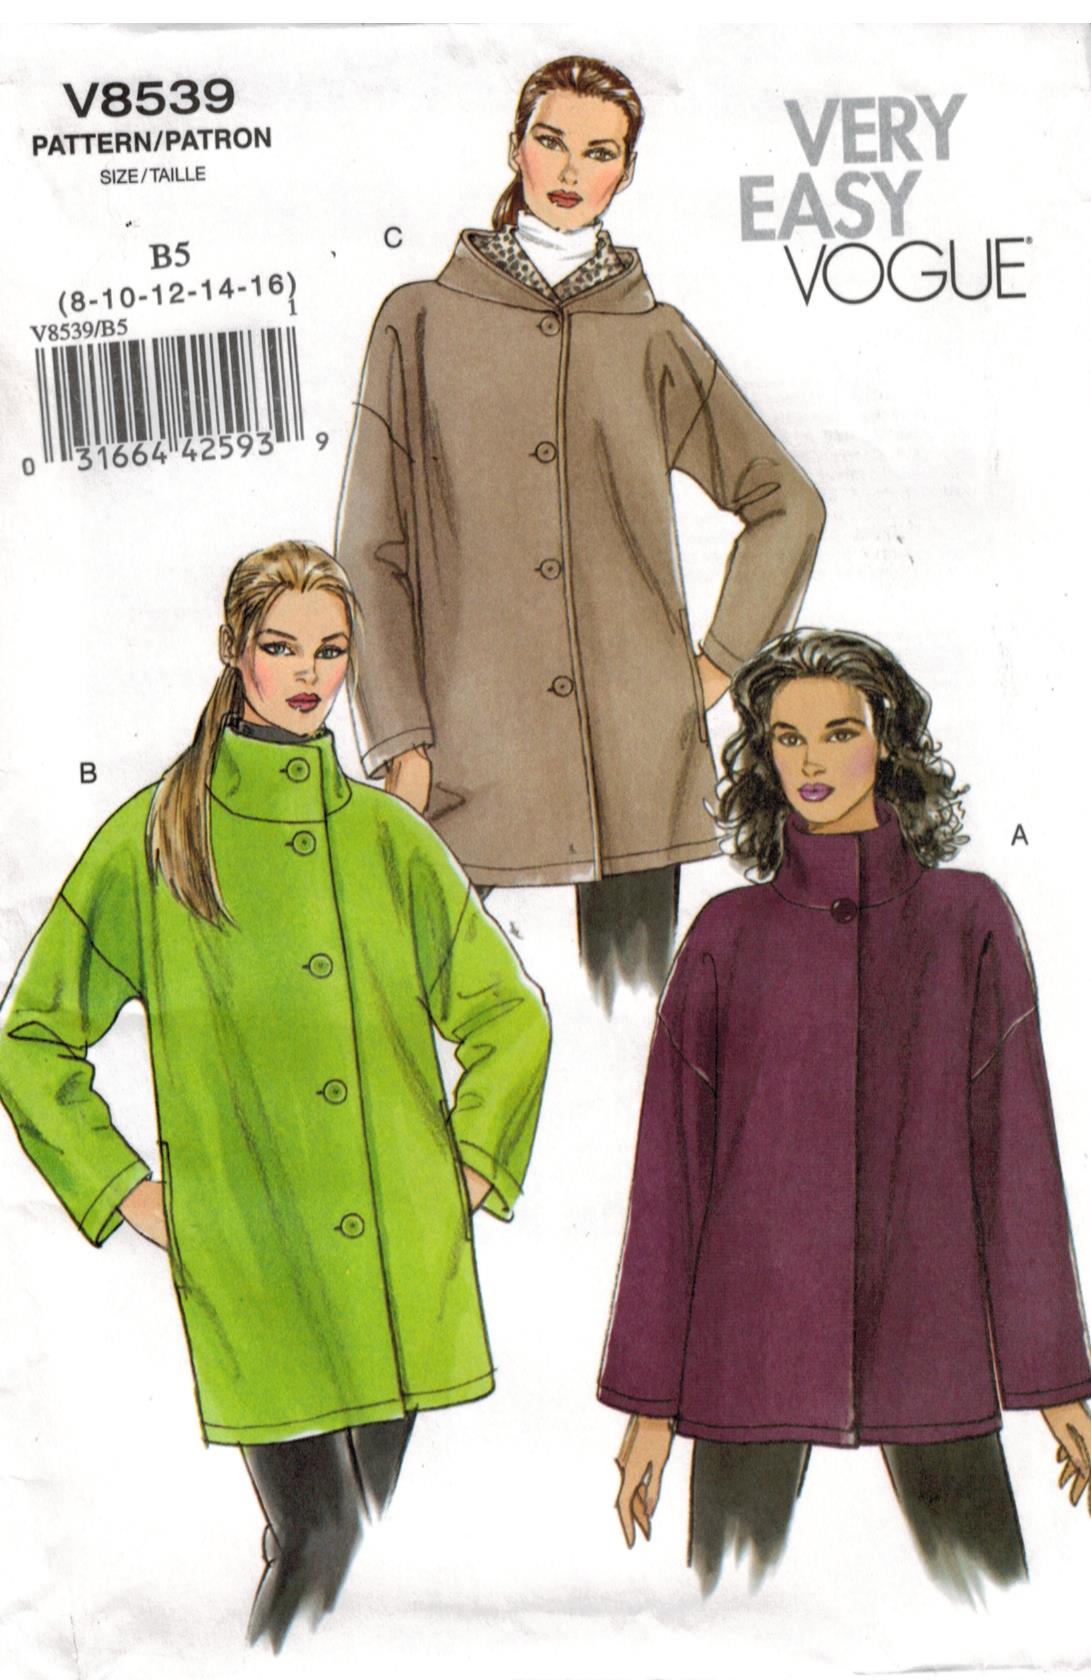 Vogue Sewing Patterns For Women